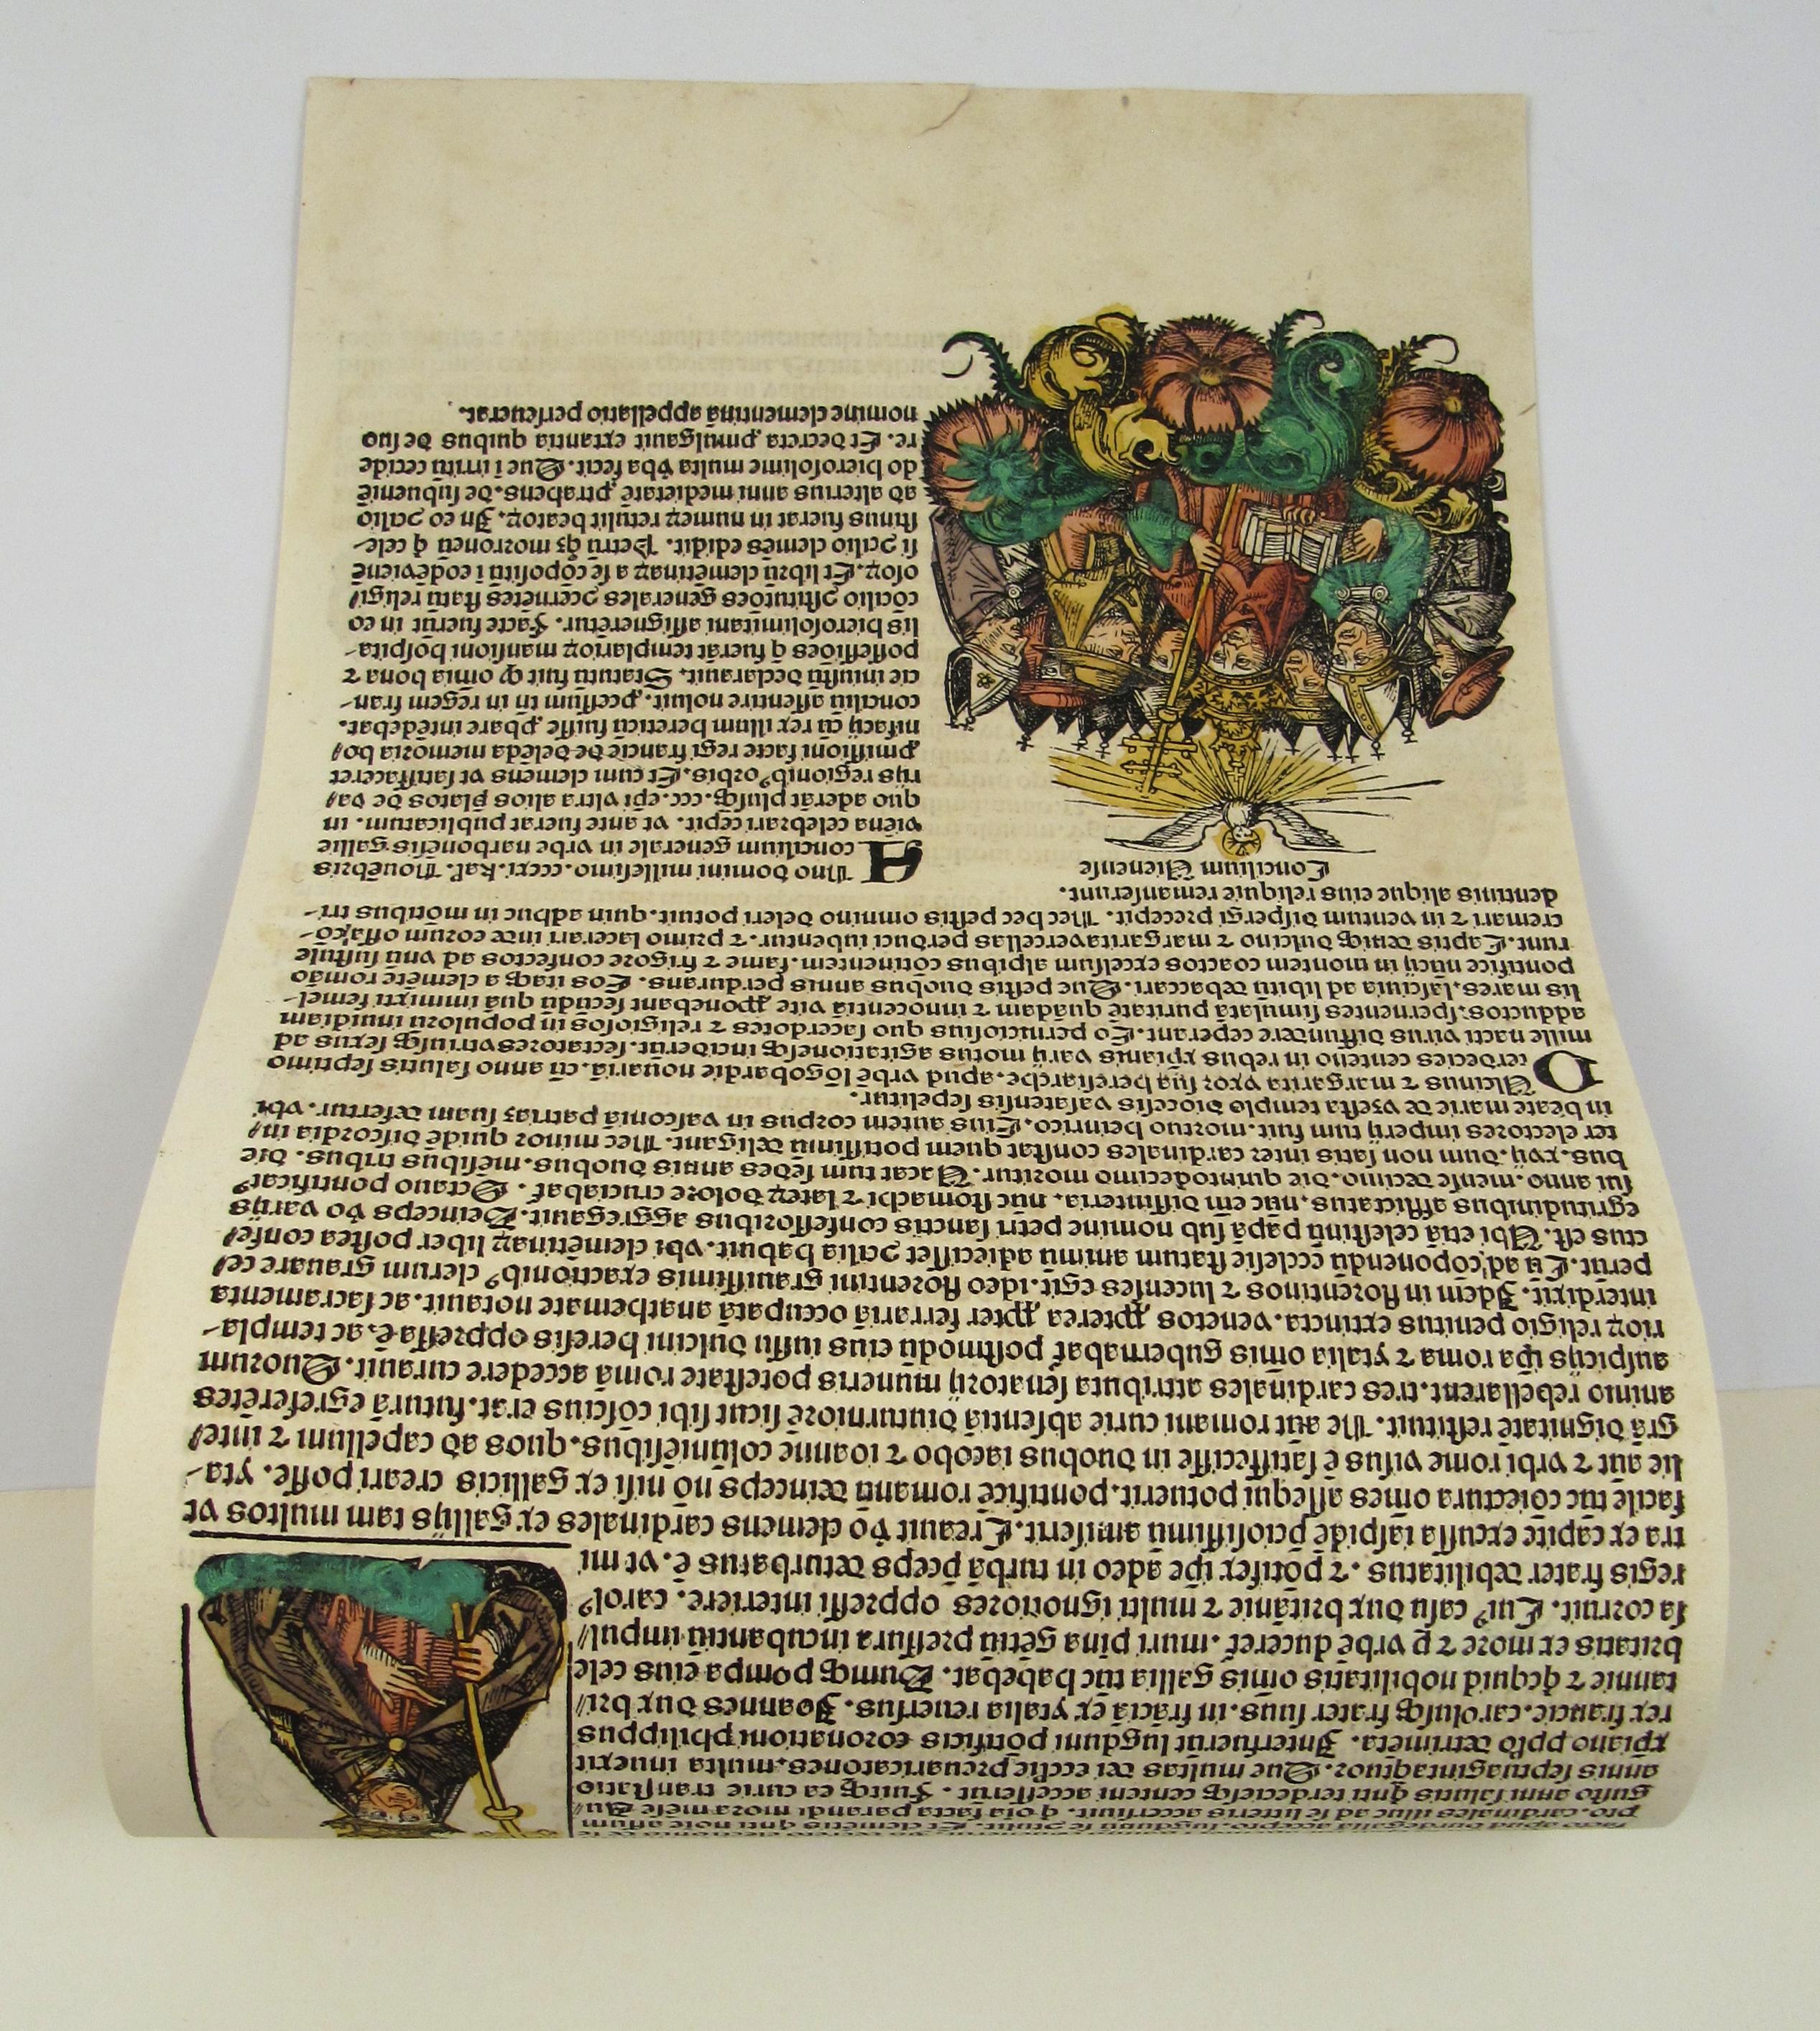 Collection of Ten Medieval Woodblock Prints from the 'Nuremberg Chronicle'  1